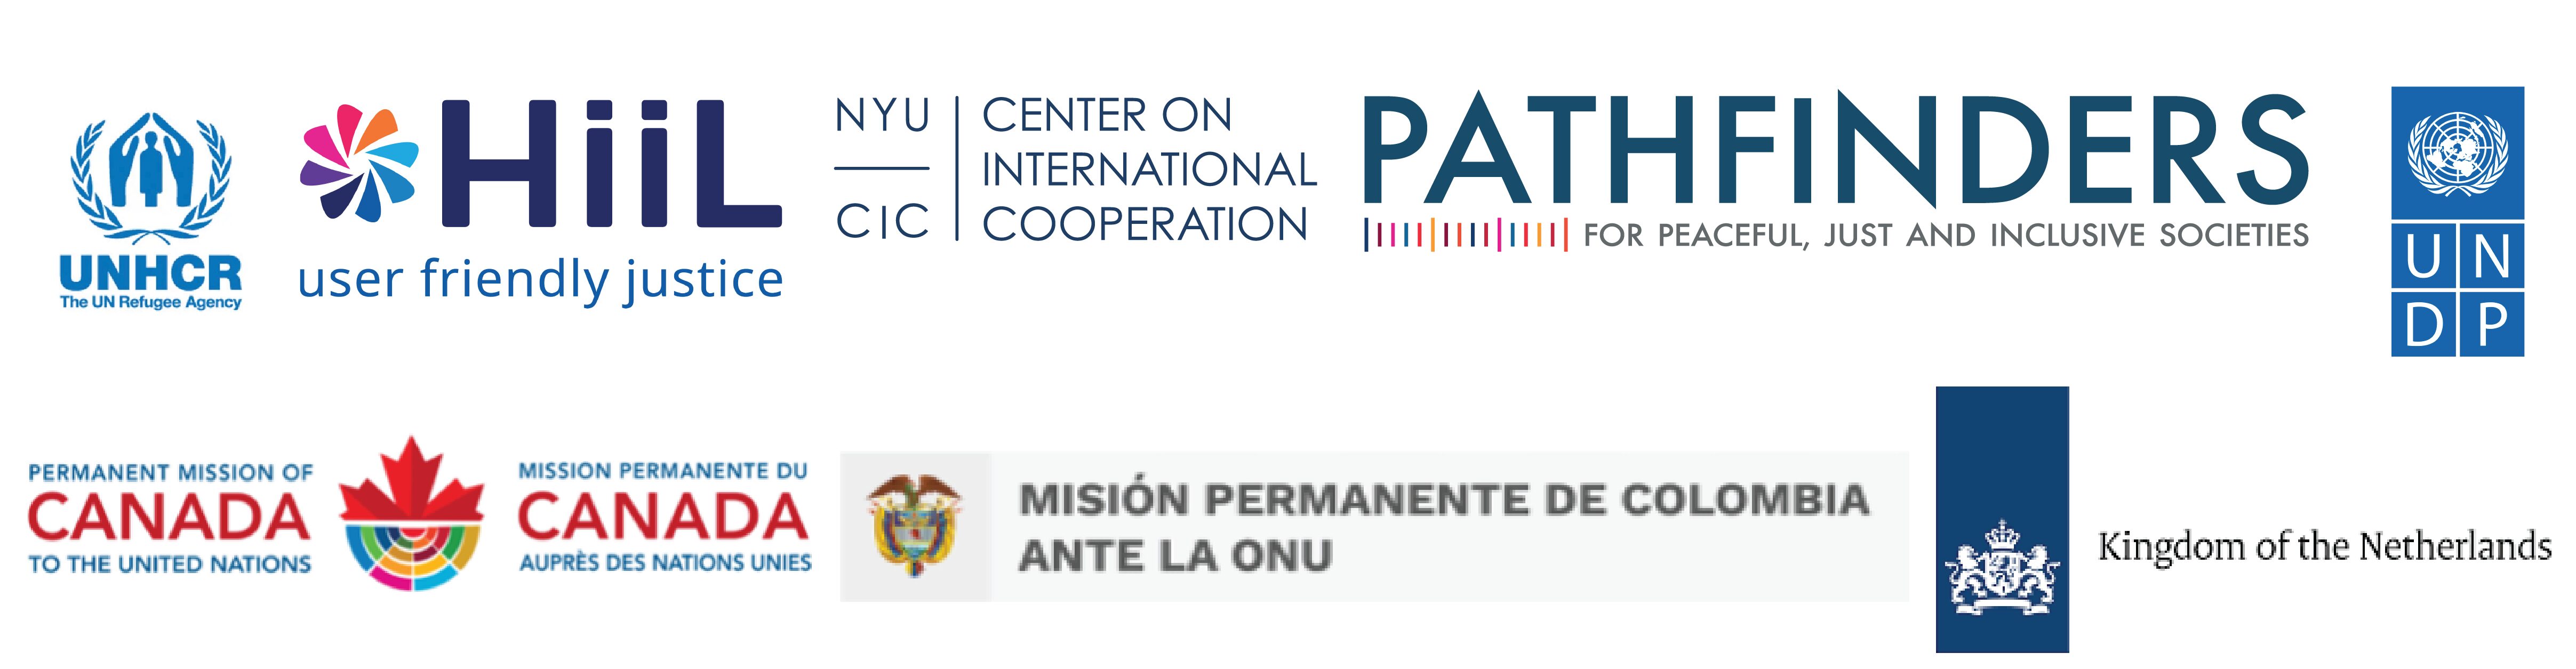 Graphic consists of eight logos of organizations co-hosting the event: UNHCR, HiiL, NYU CIC, Pathfinders, UNDP, Permanent Mission of Canada to the UN, Permanent Mission of Colombia to the UN, Kingdom of the Netherlands